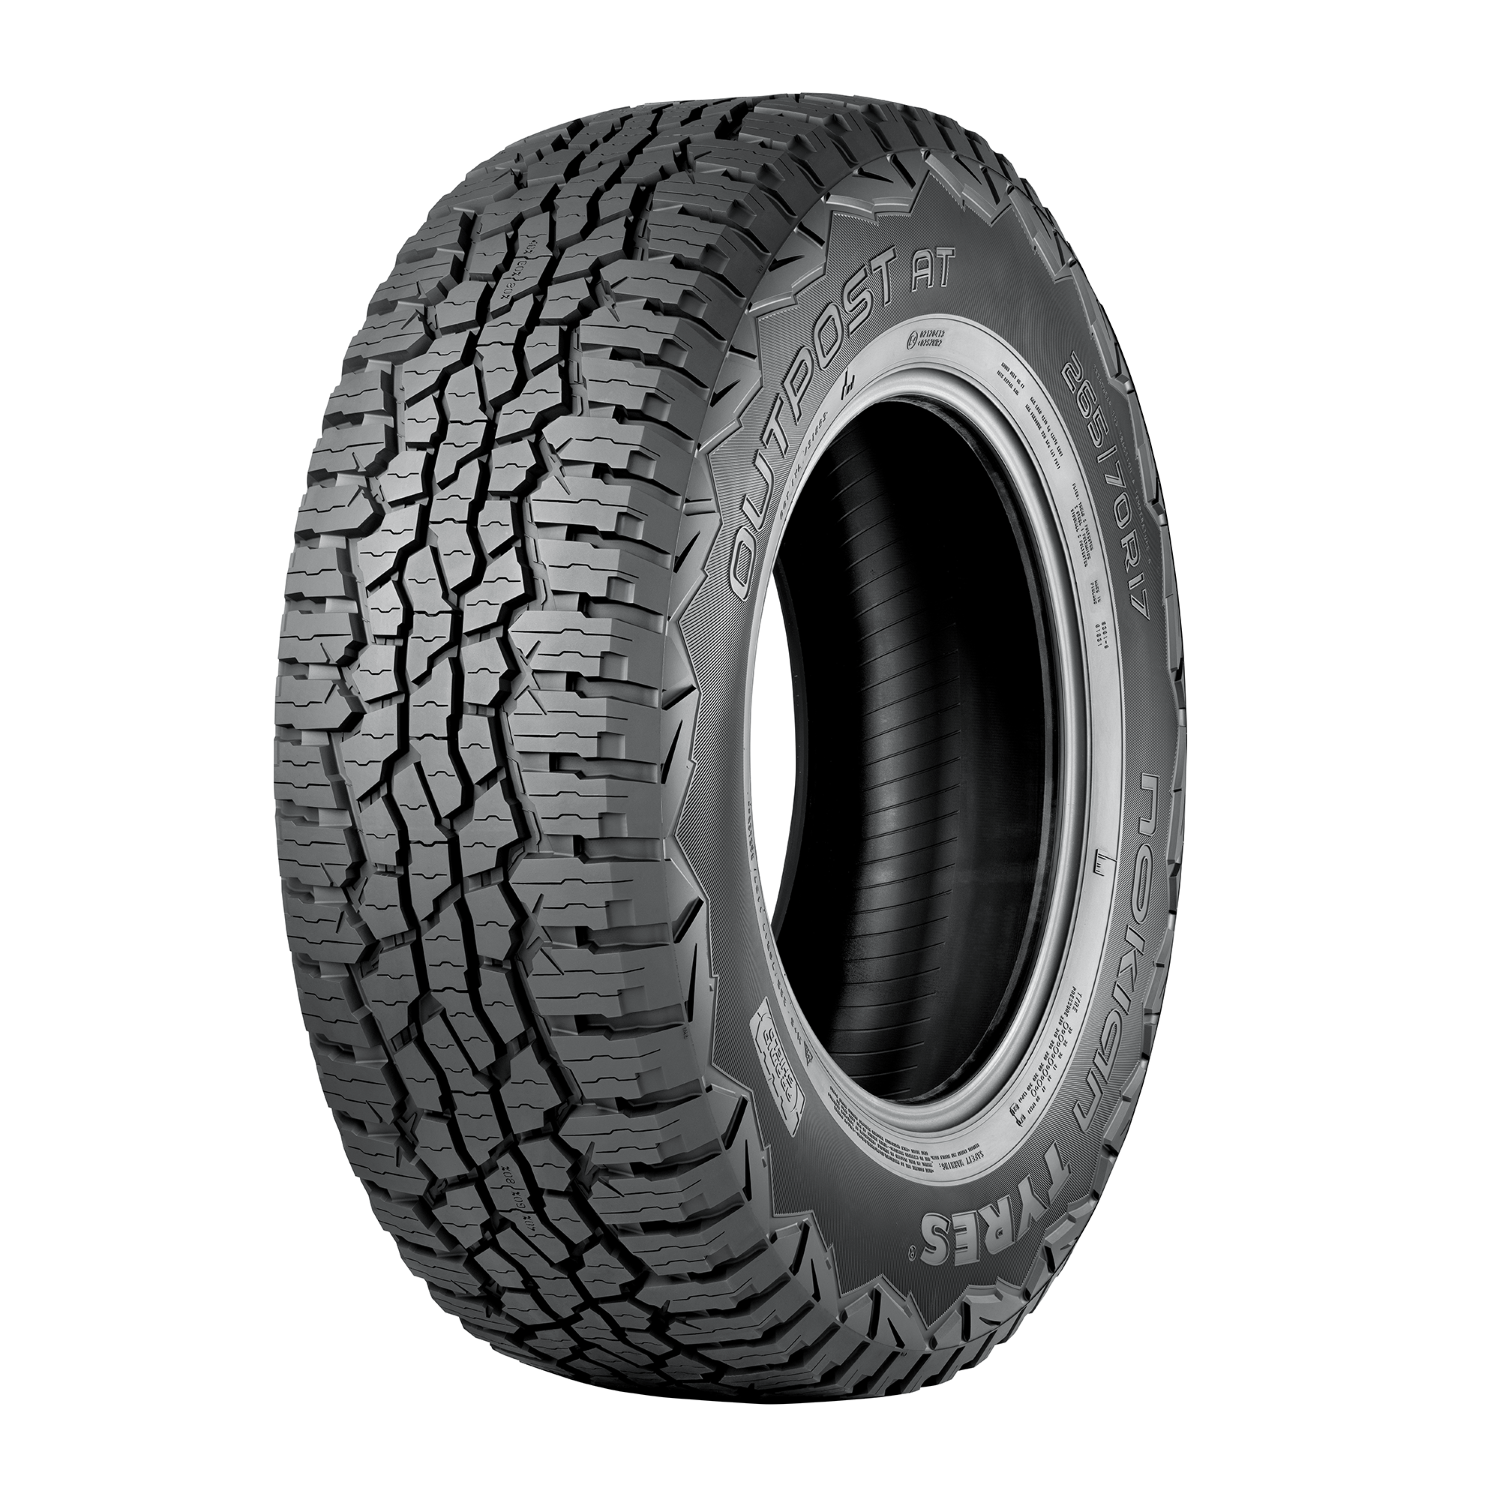 Nokian Outpost AT - Tire Reviews and Tests